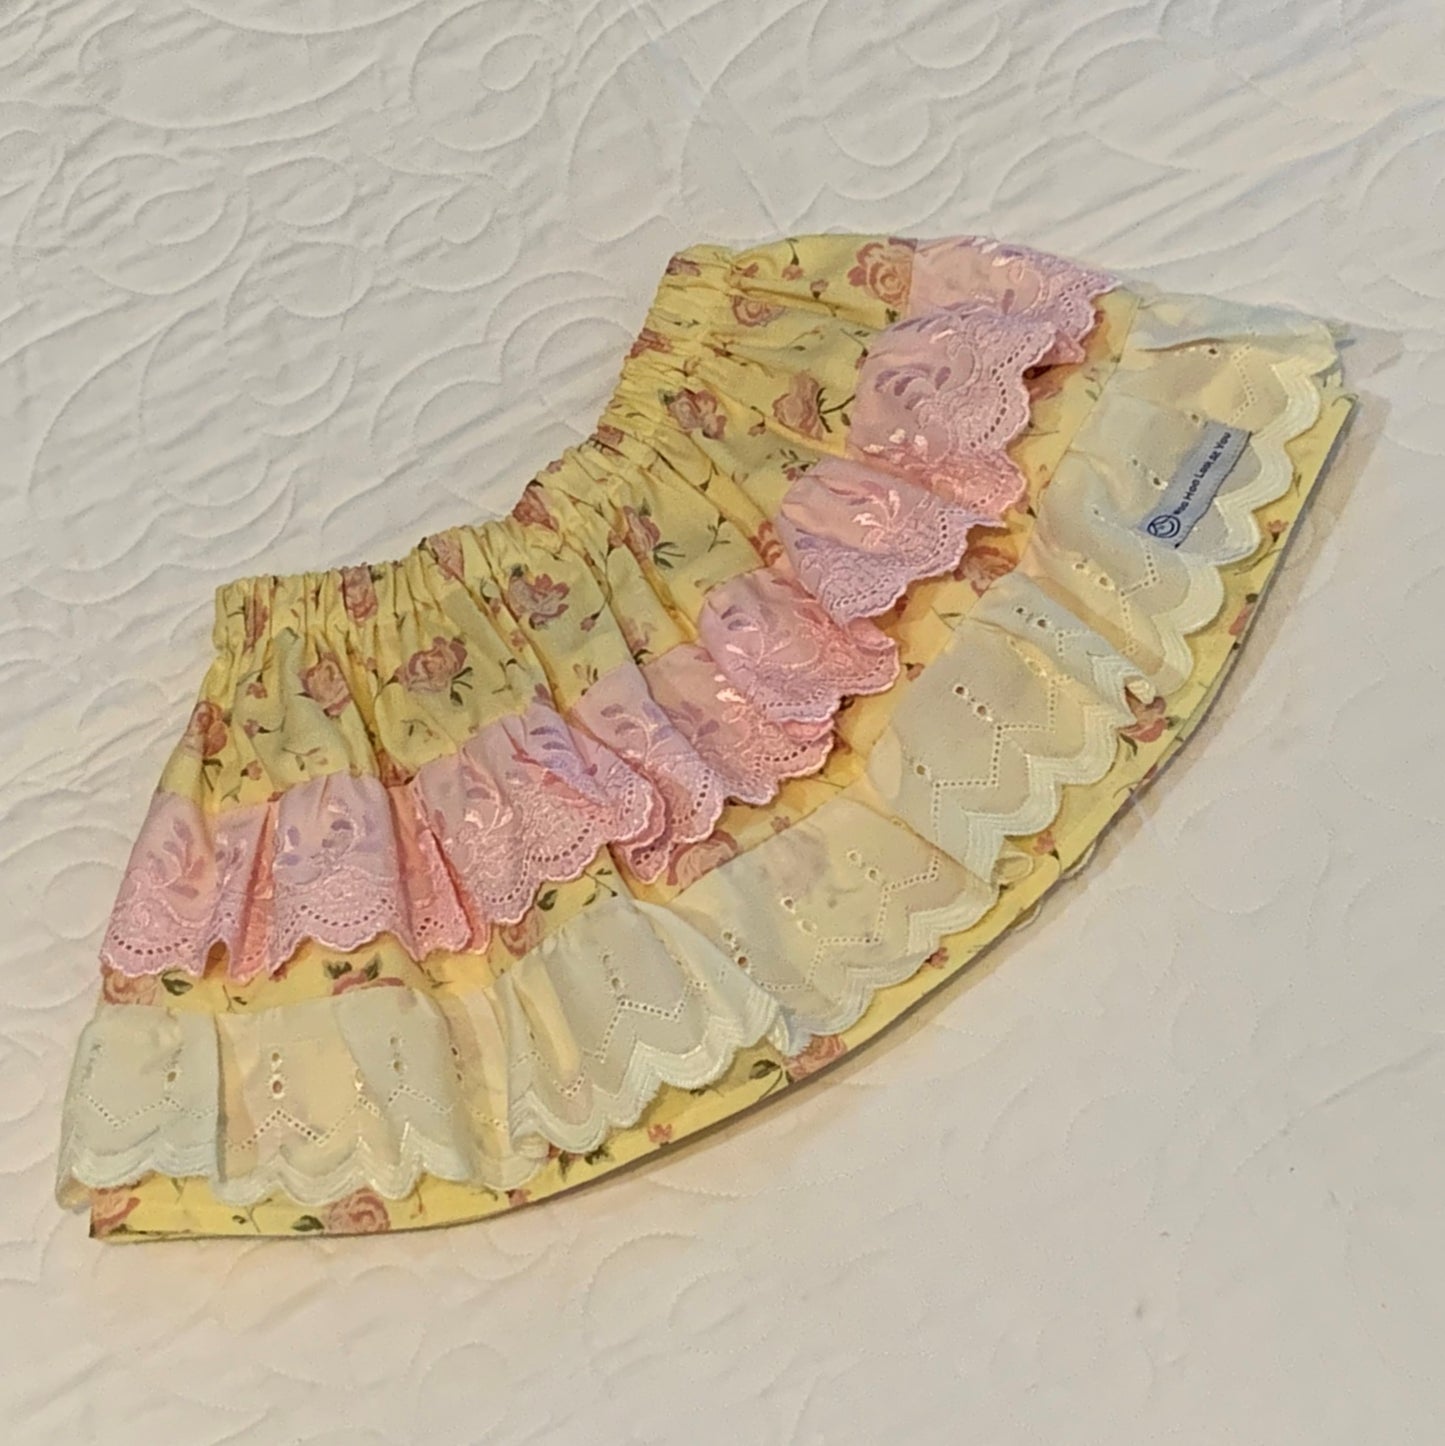 2 Piece Set - Skirt & Slip Ons - Cream with Pink and Yellow Flowers